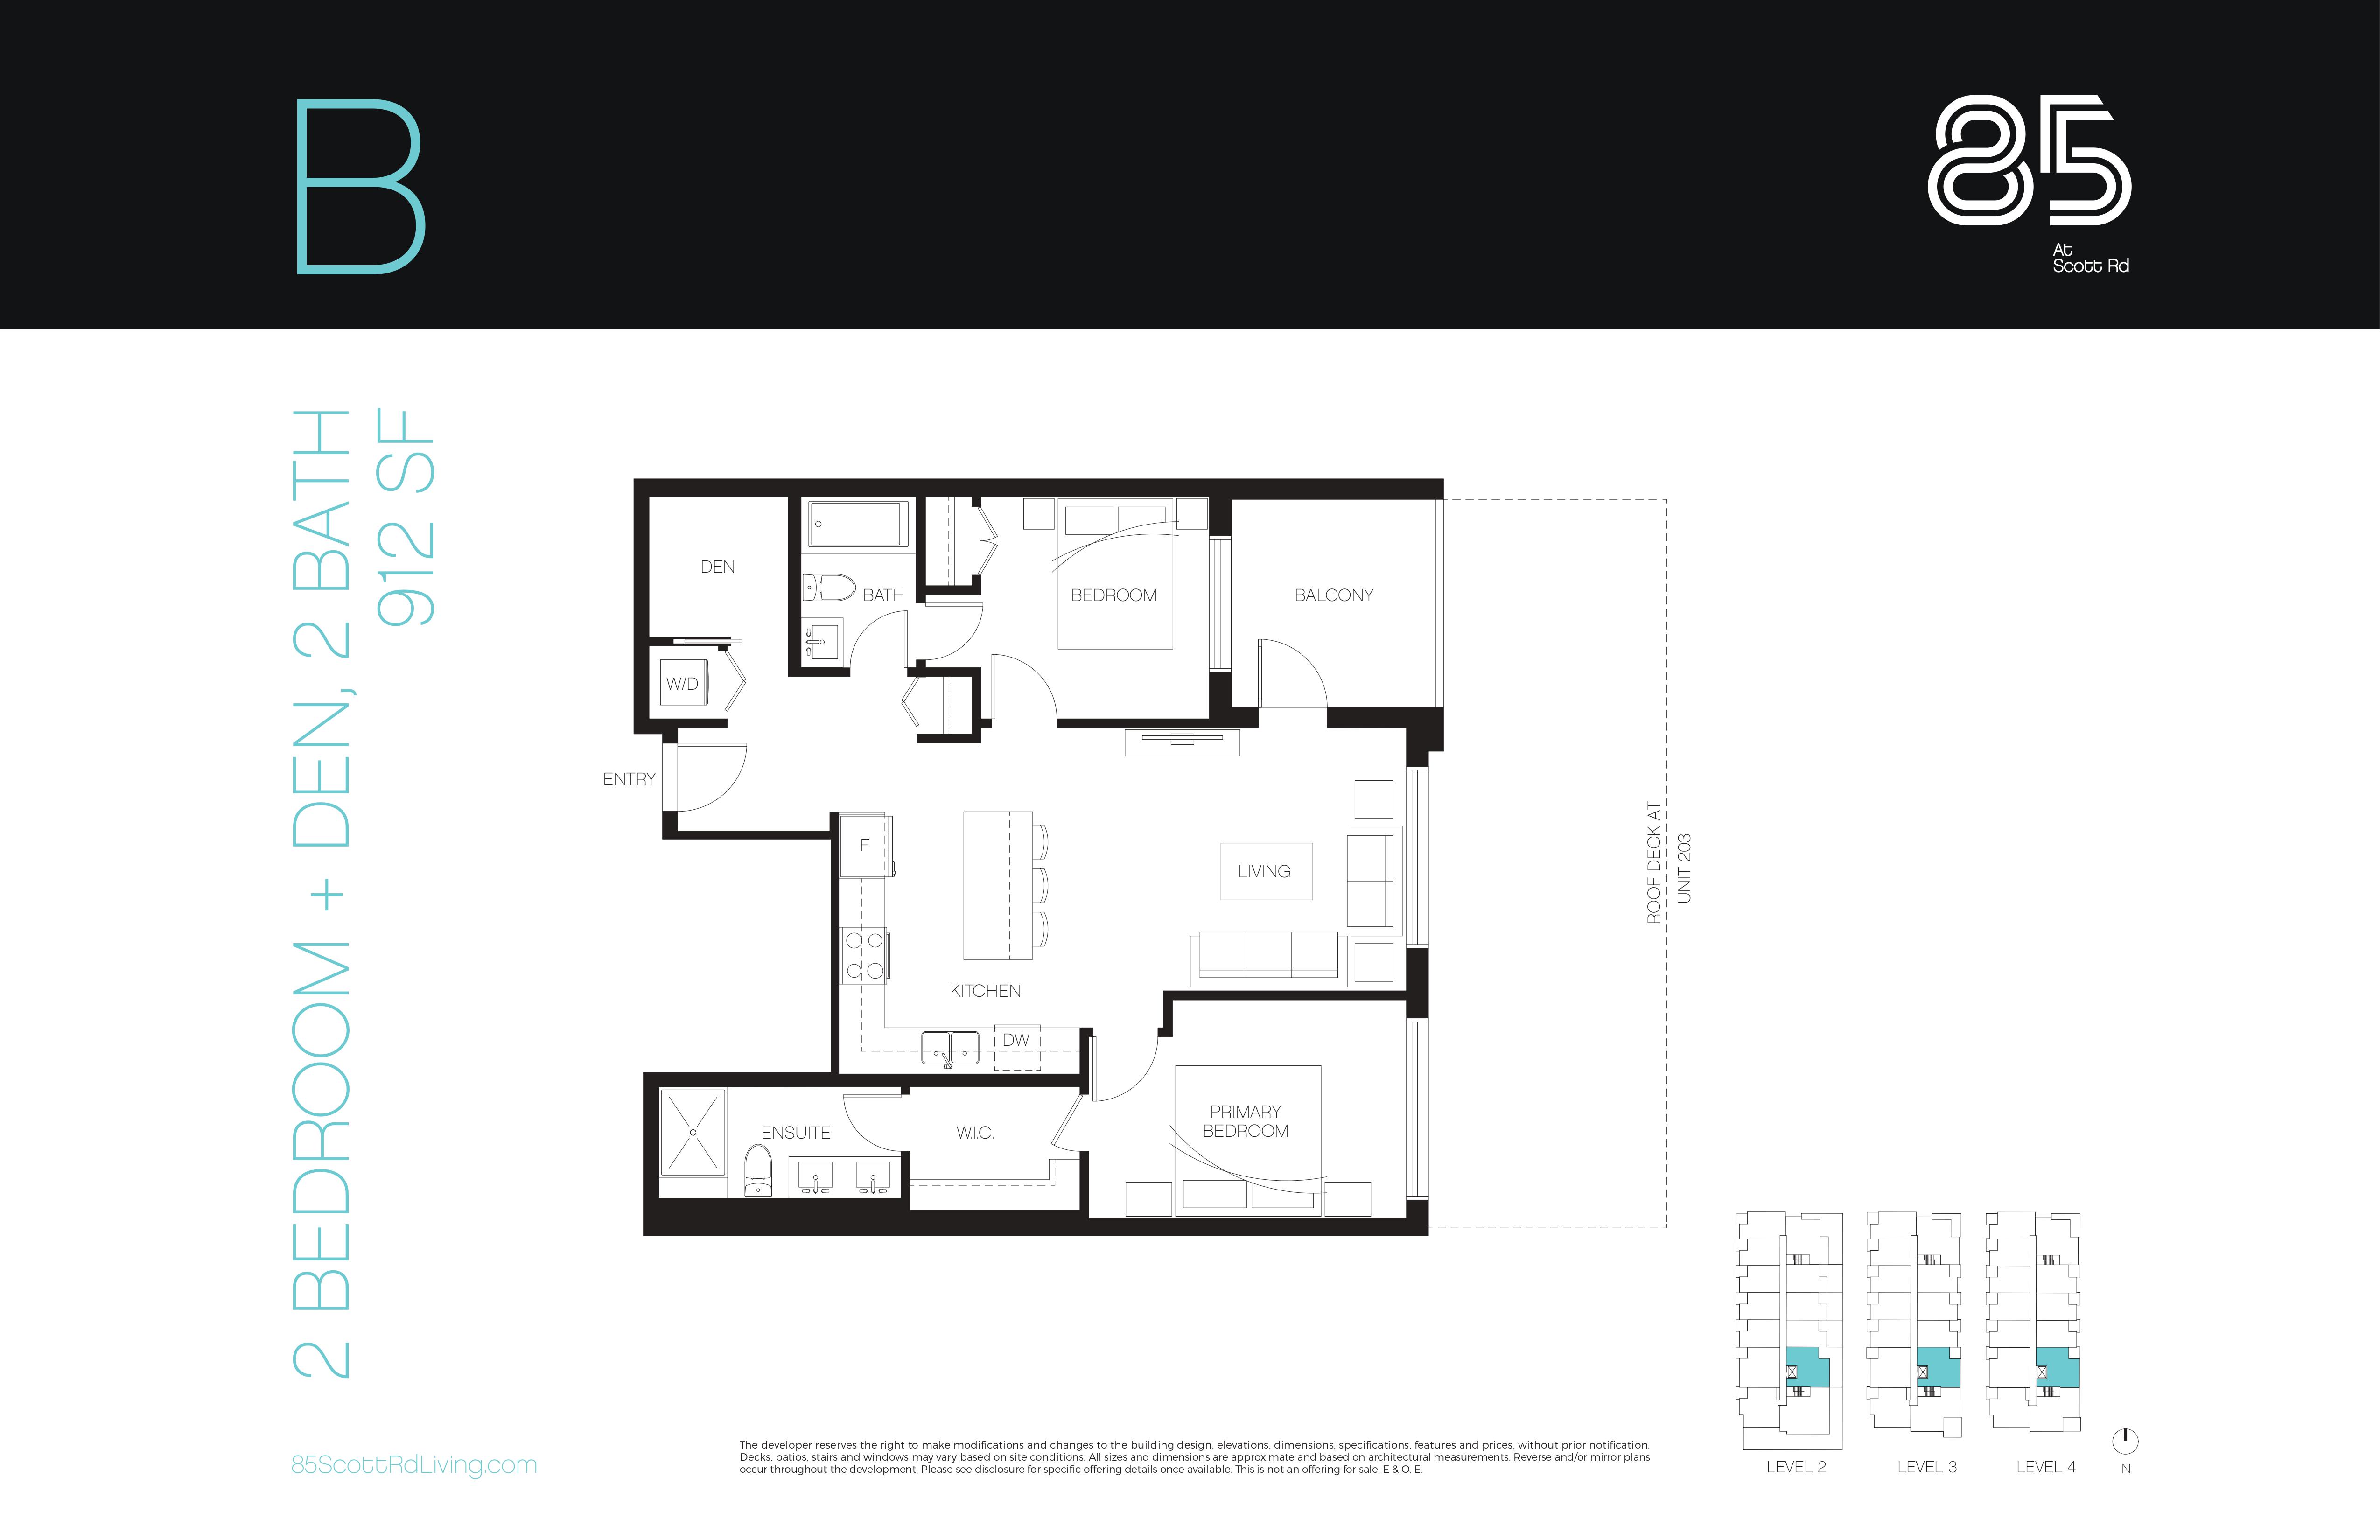 B Floor Plan of The 85 Condos with undefined beds